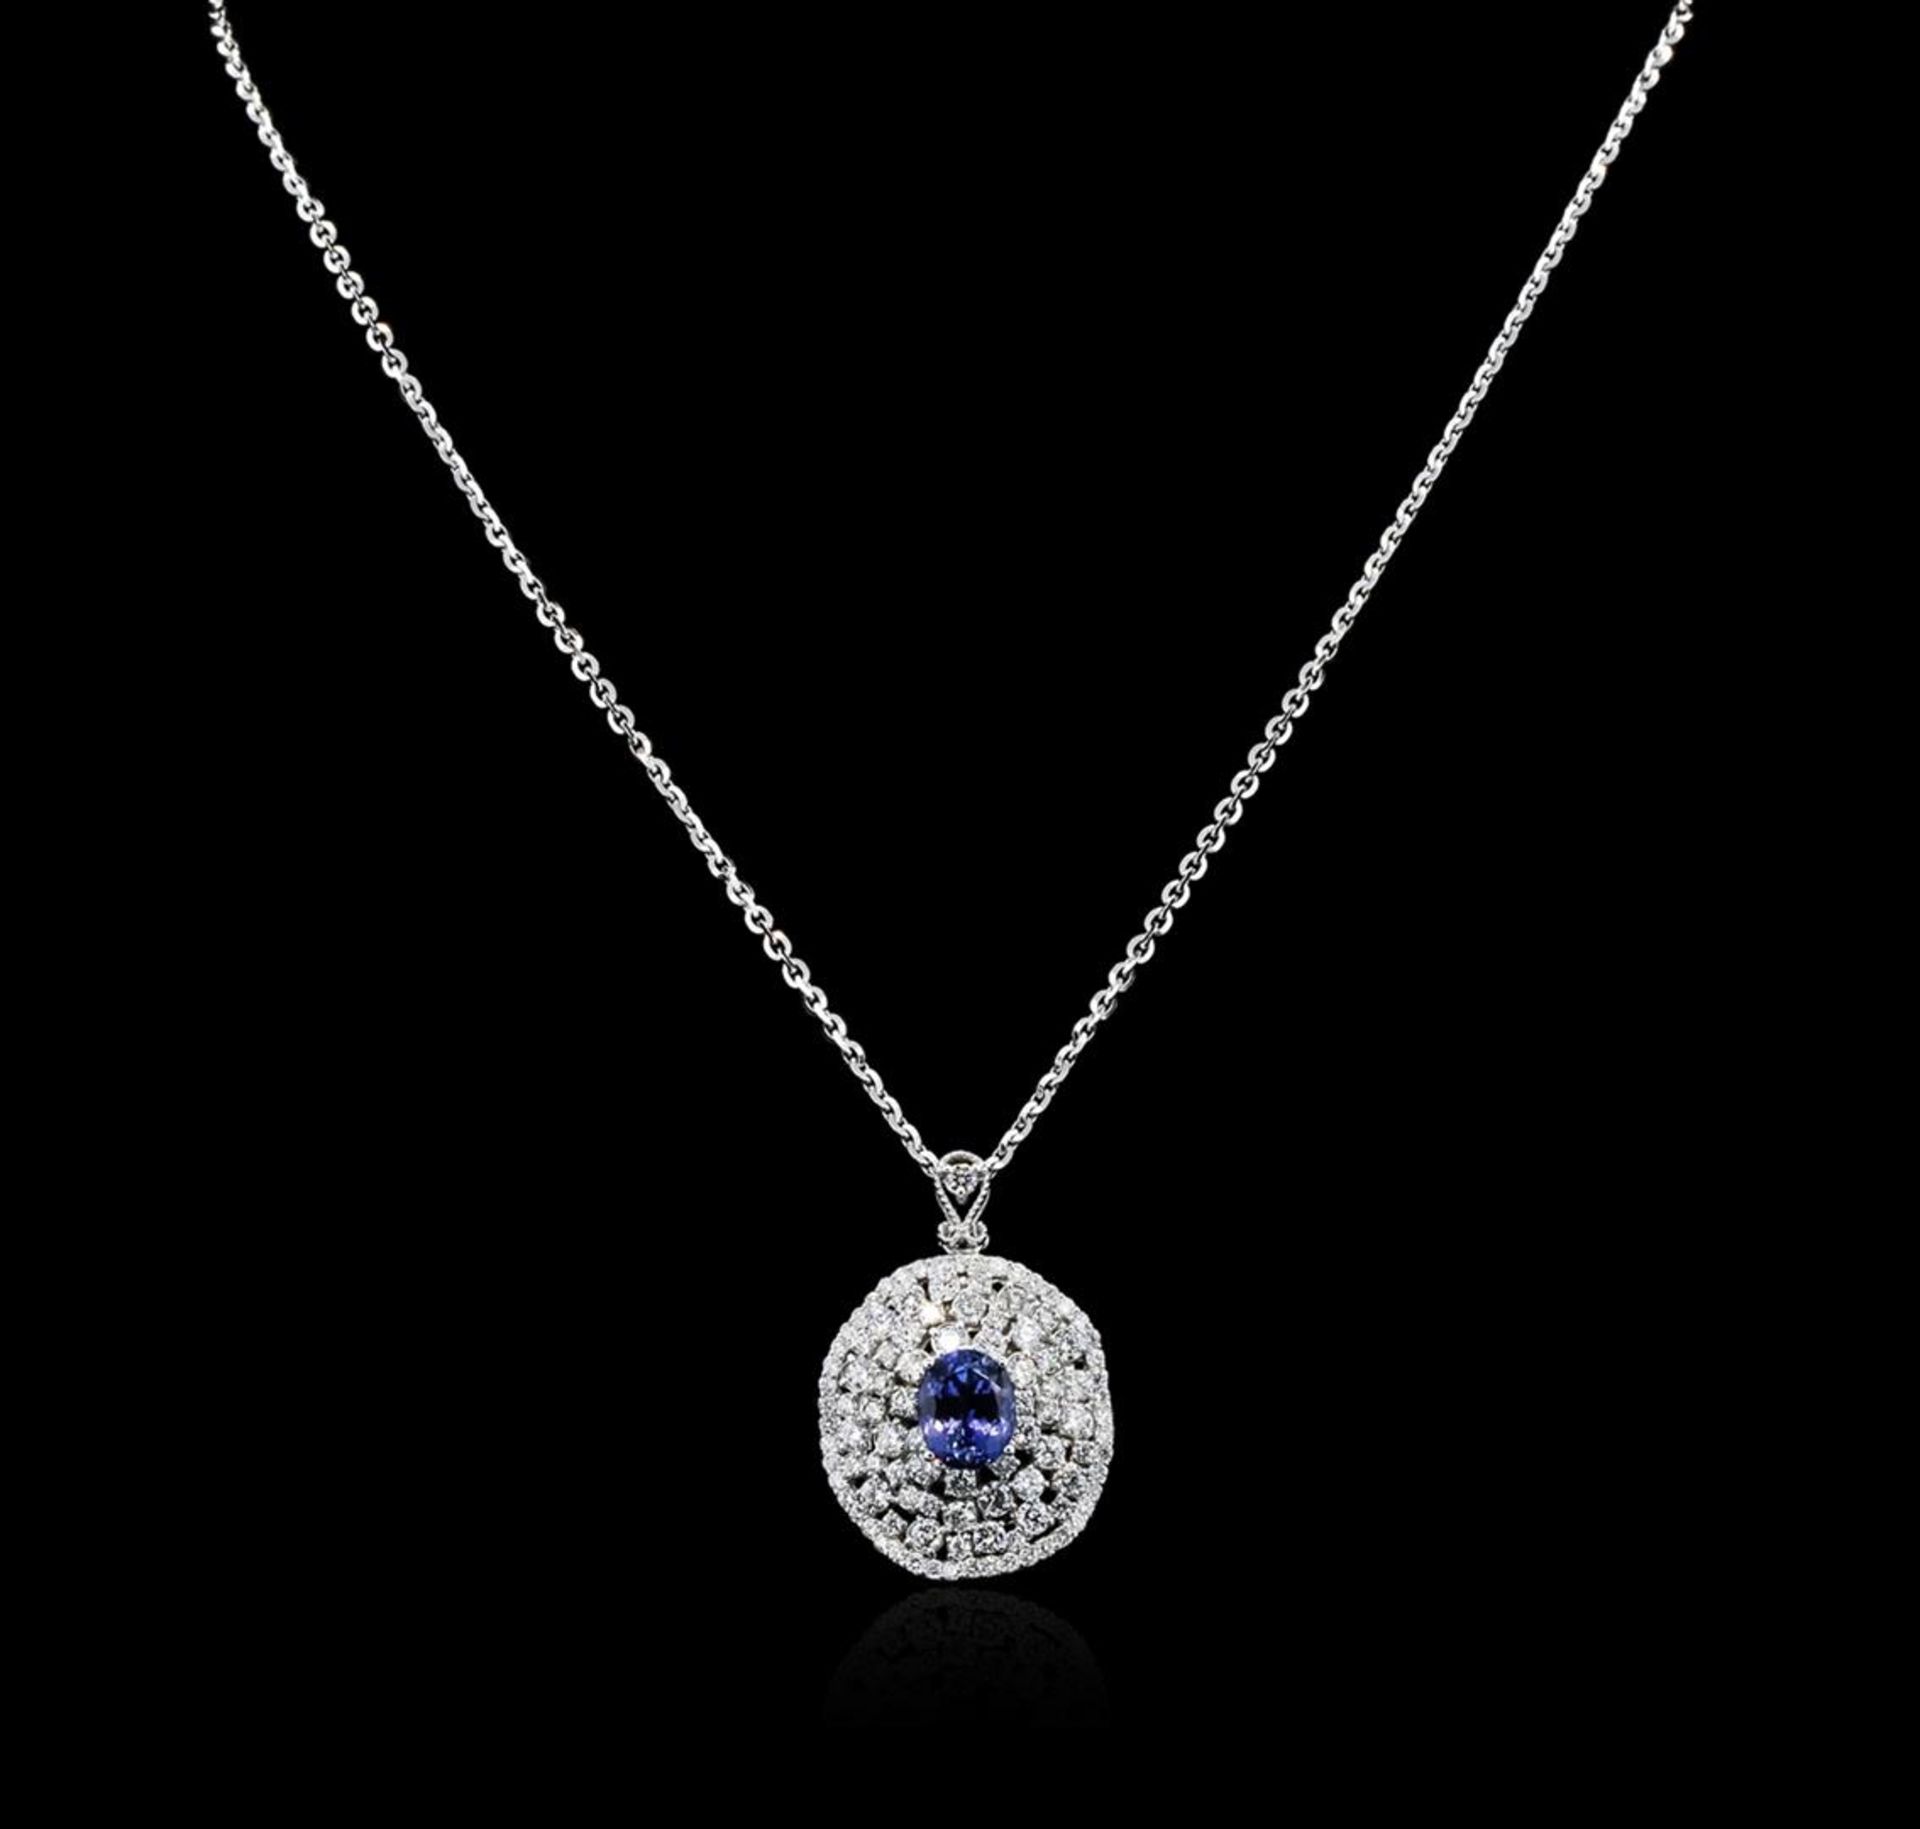 14KT White Gold 3.57ct Tanzanite and Diamond Pendant With Chain - Image 2 of 4